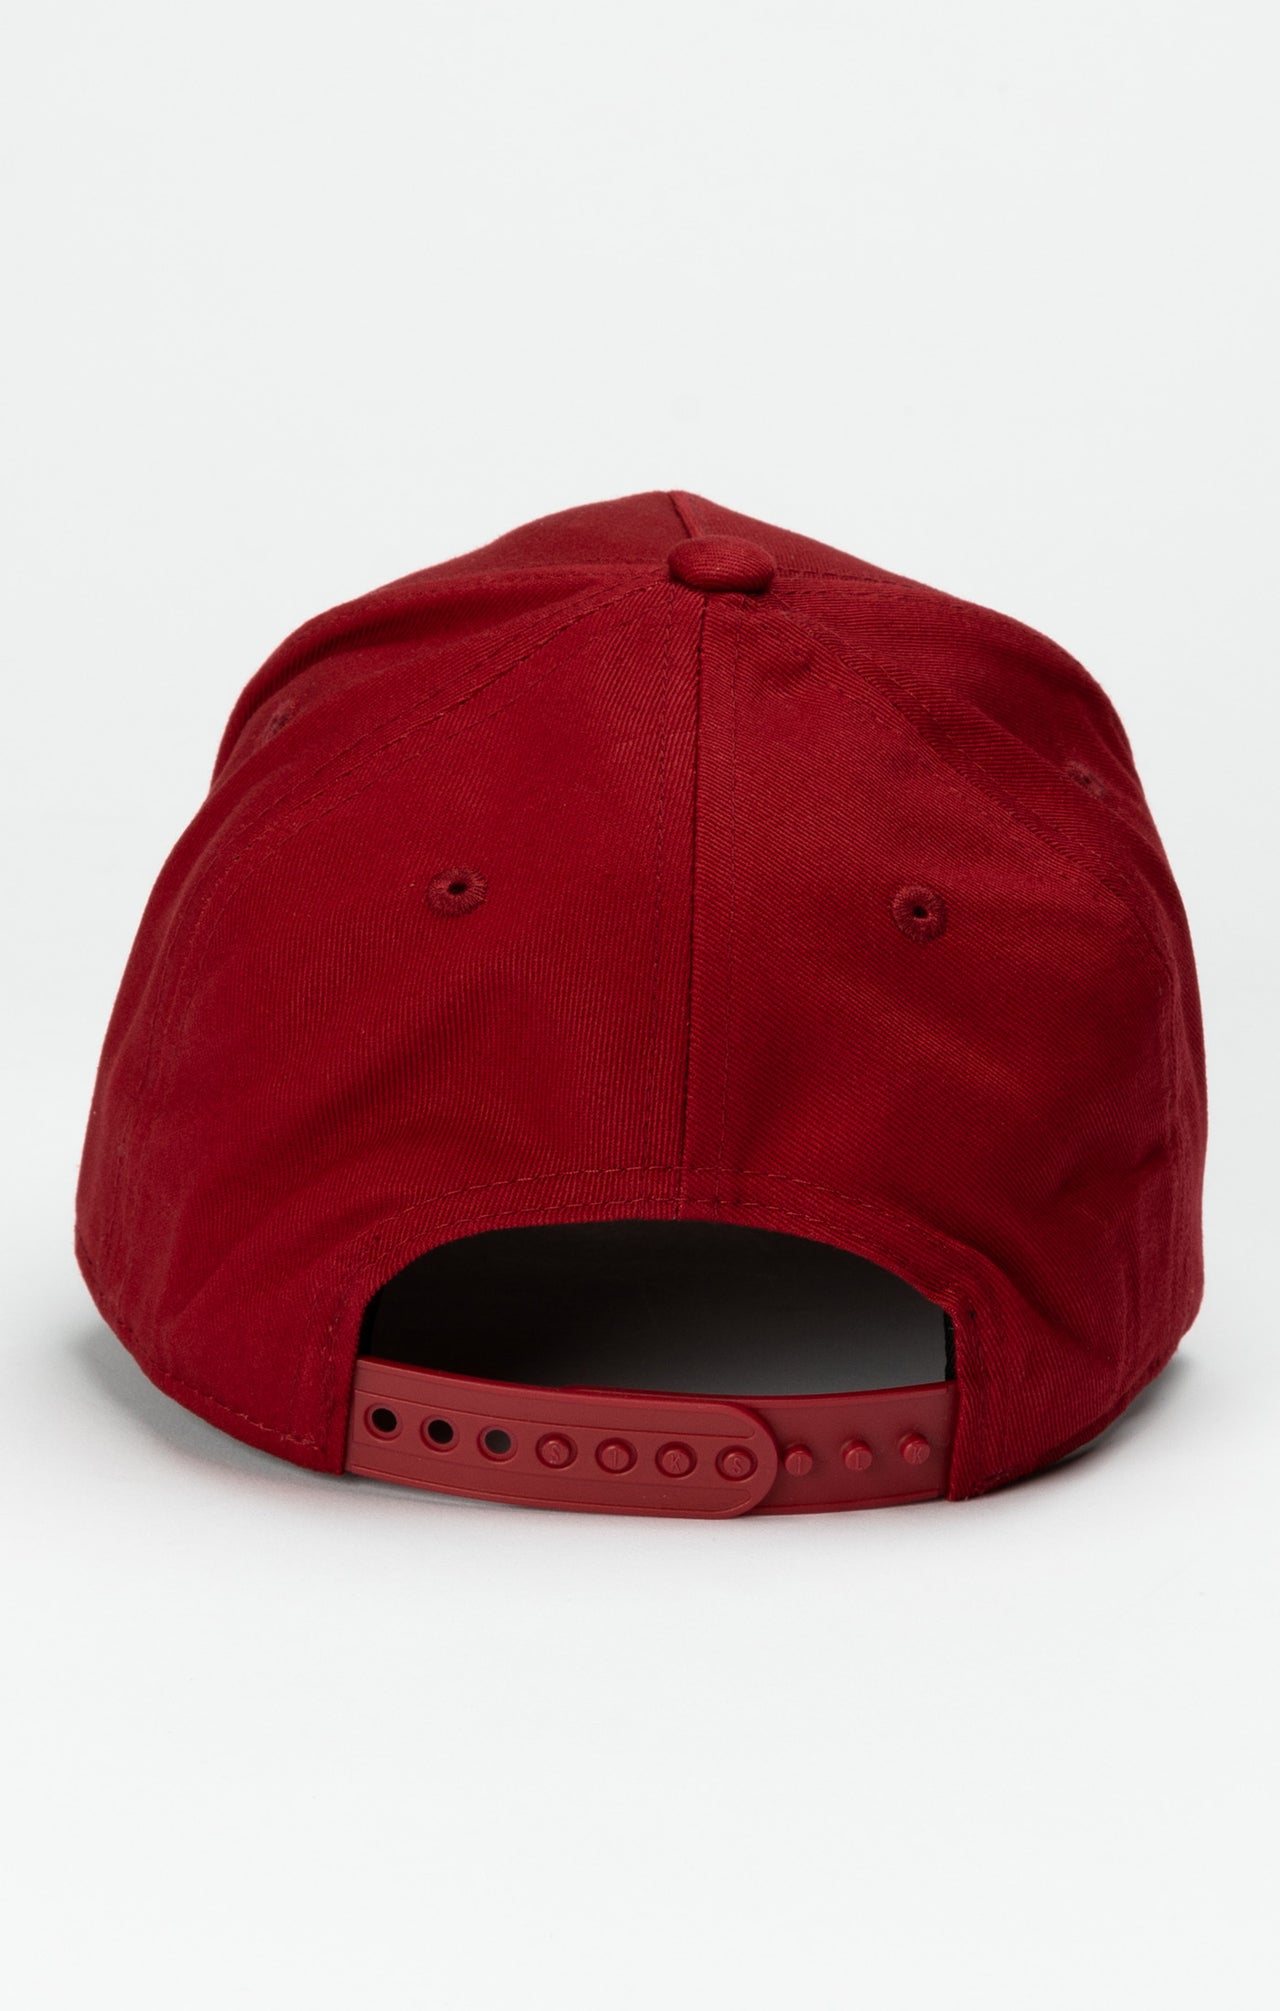 Boys Red Embroidered Trucker Cap (3)